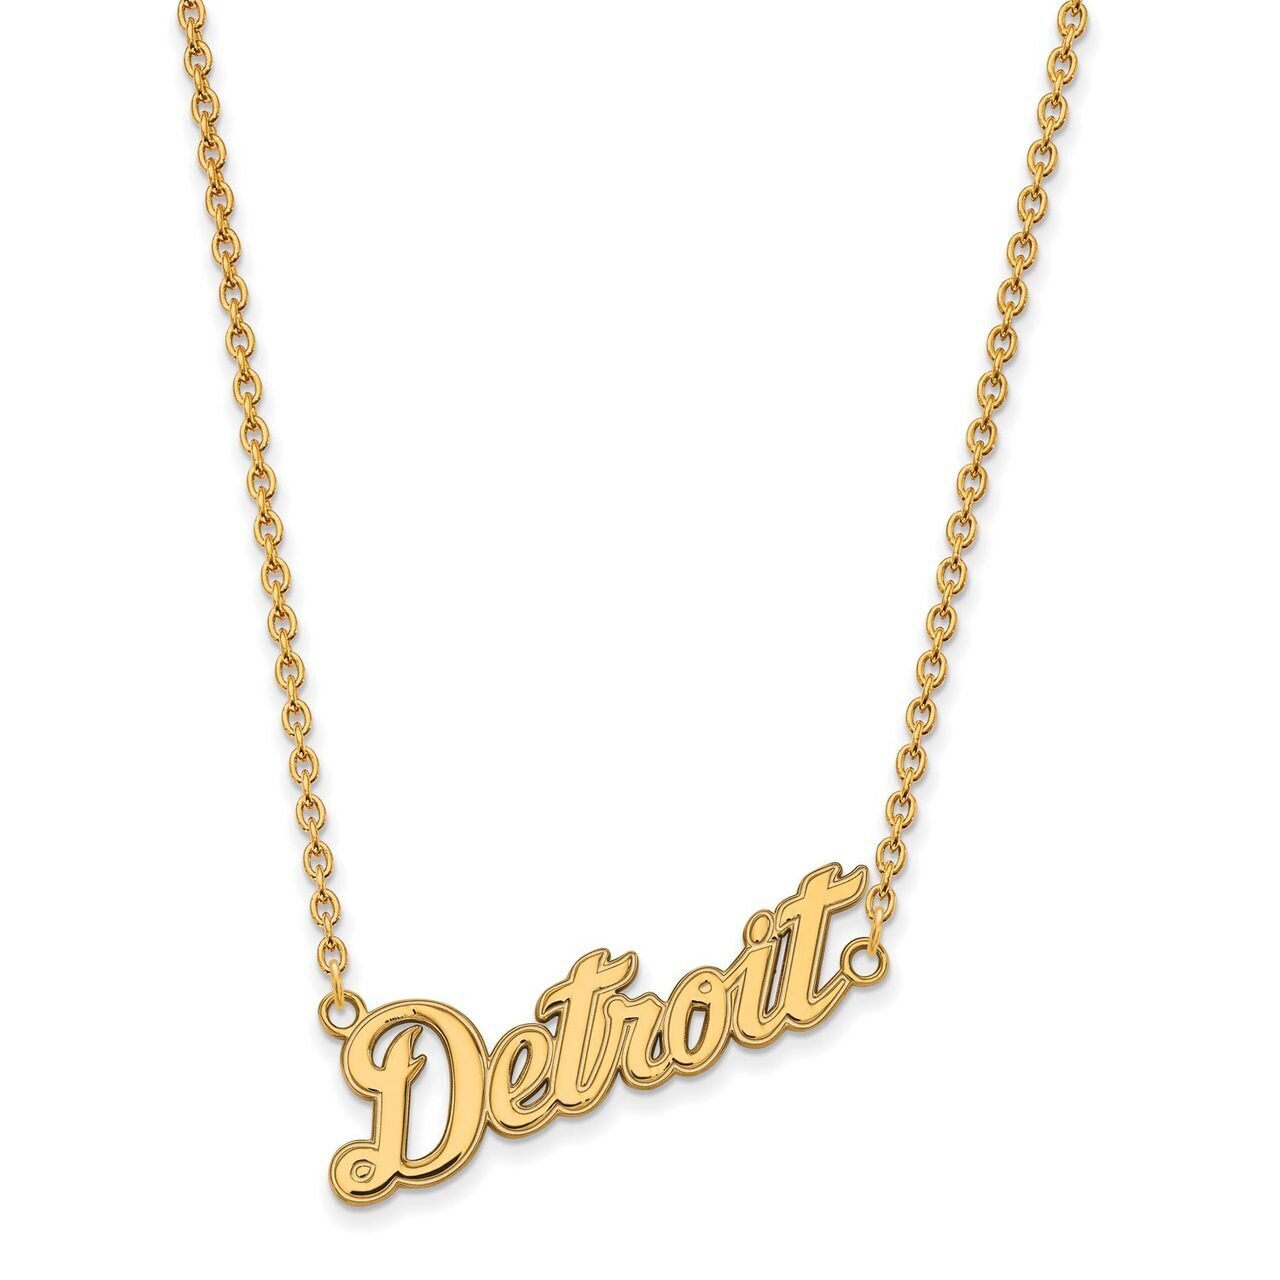 Detroit Tigers Large Pendant with Chain Necklace Gold-plated Silver GP062TIG-18